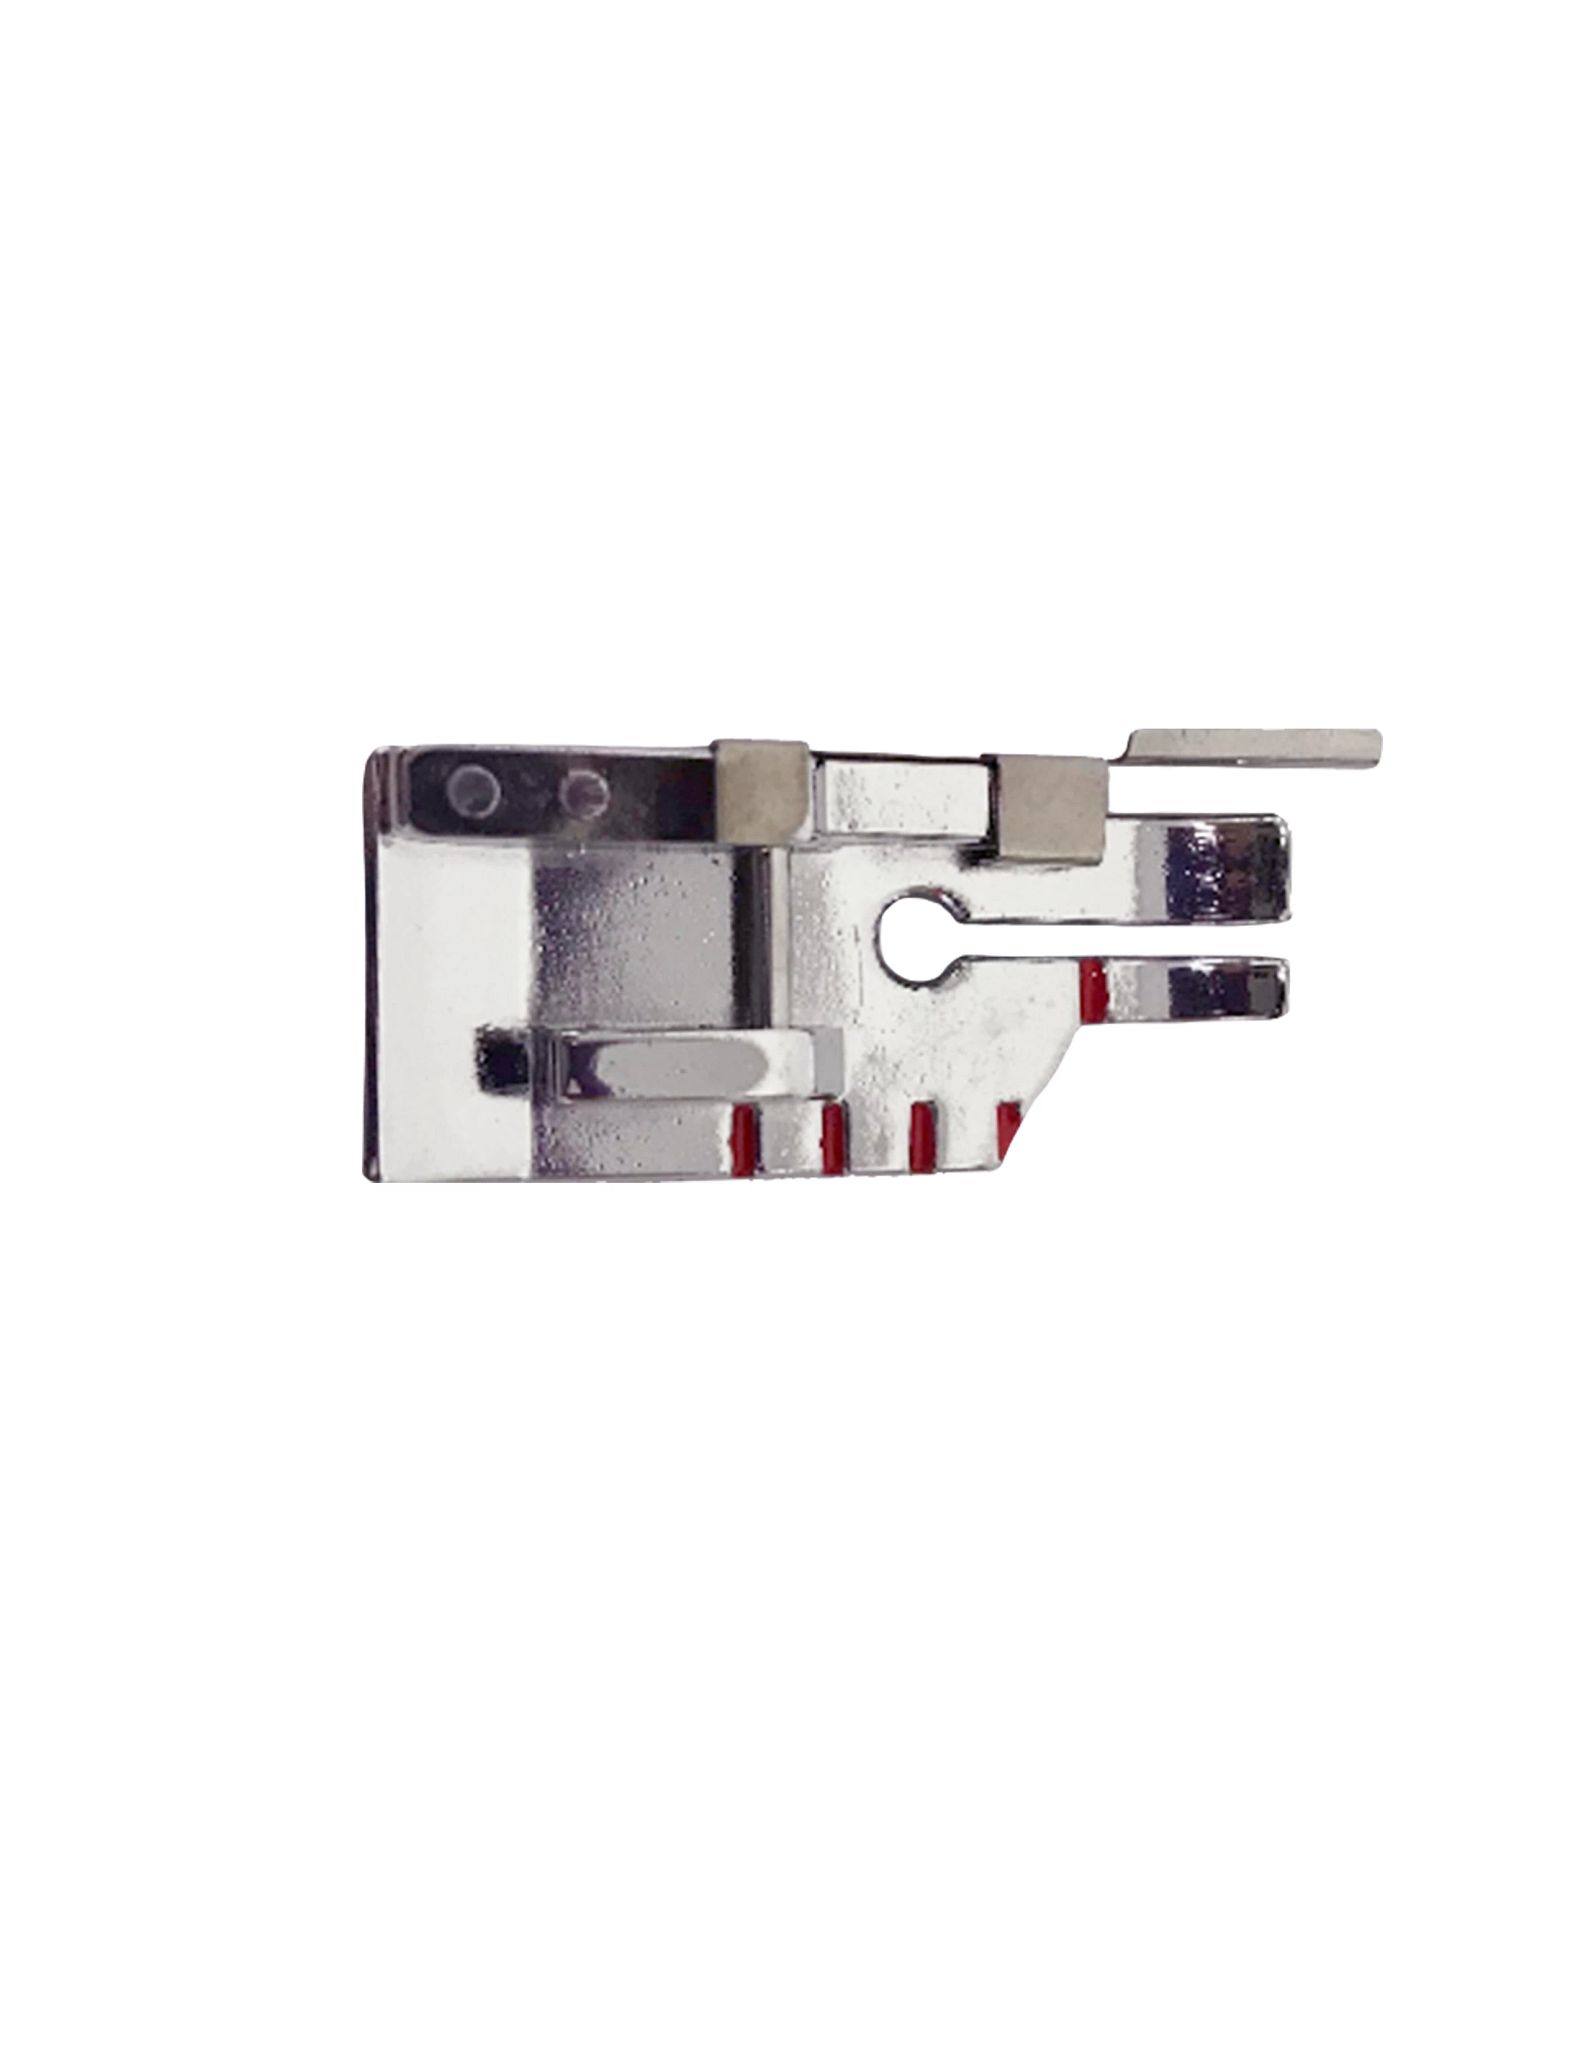 SINGER 1/4" Presser Foot with Guide